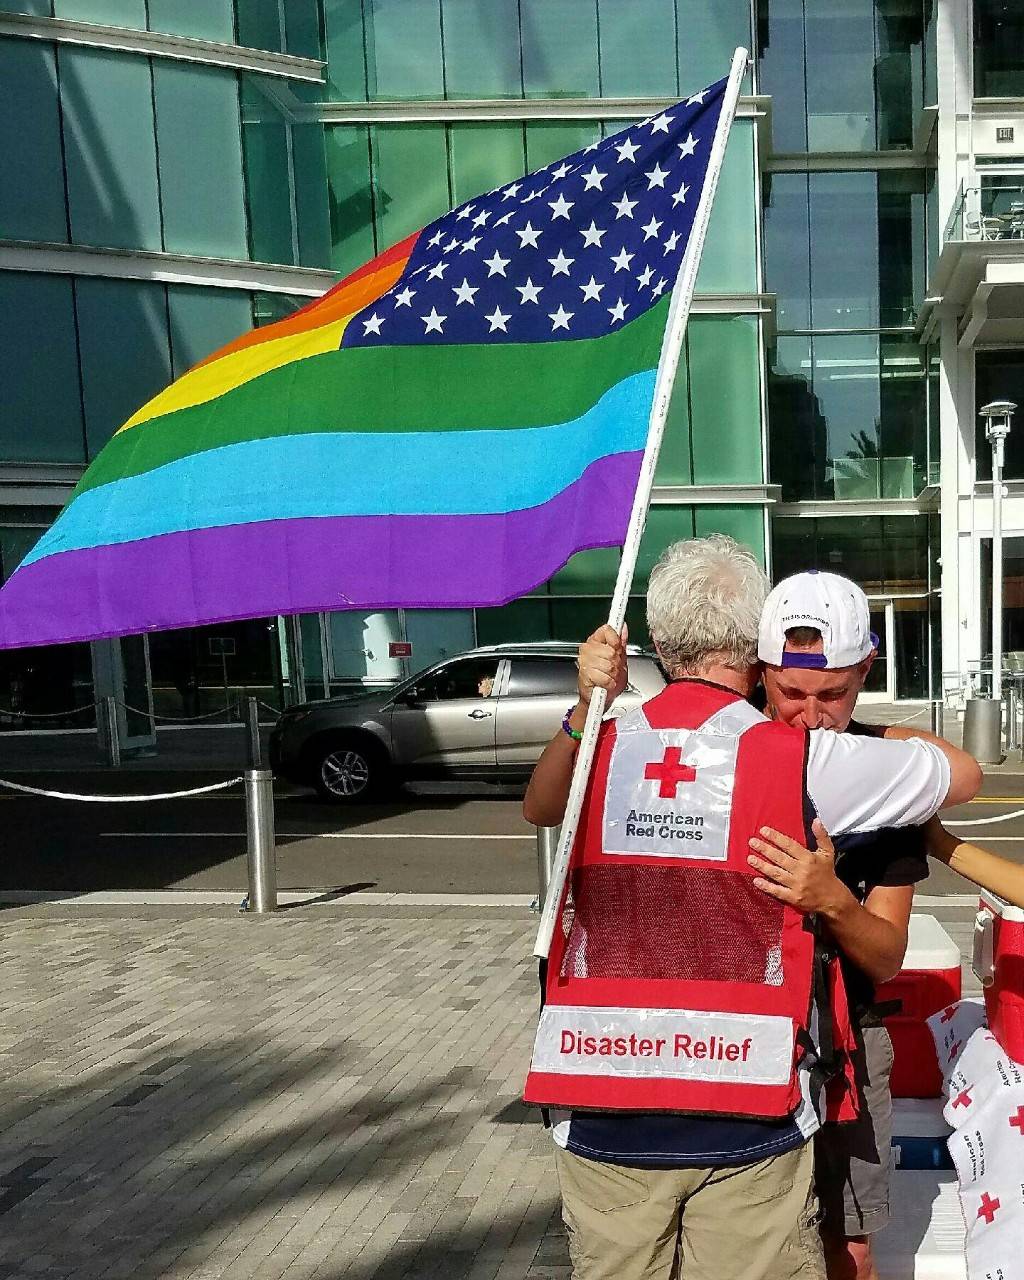 Red Cross: Caring for Each Other After the Orlando Shooting